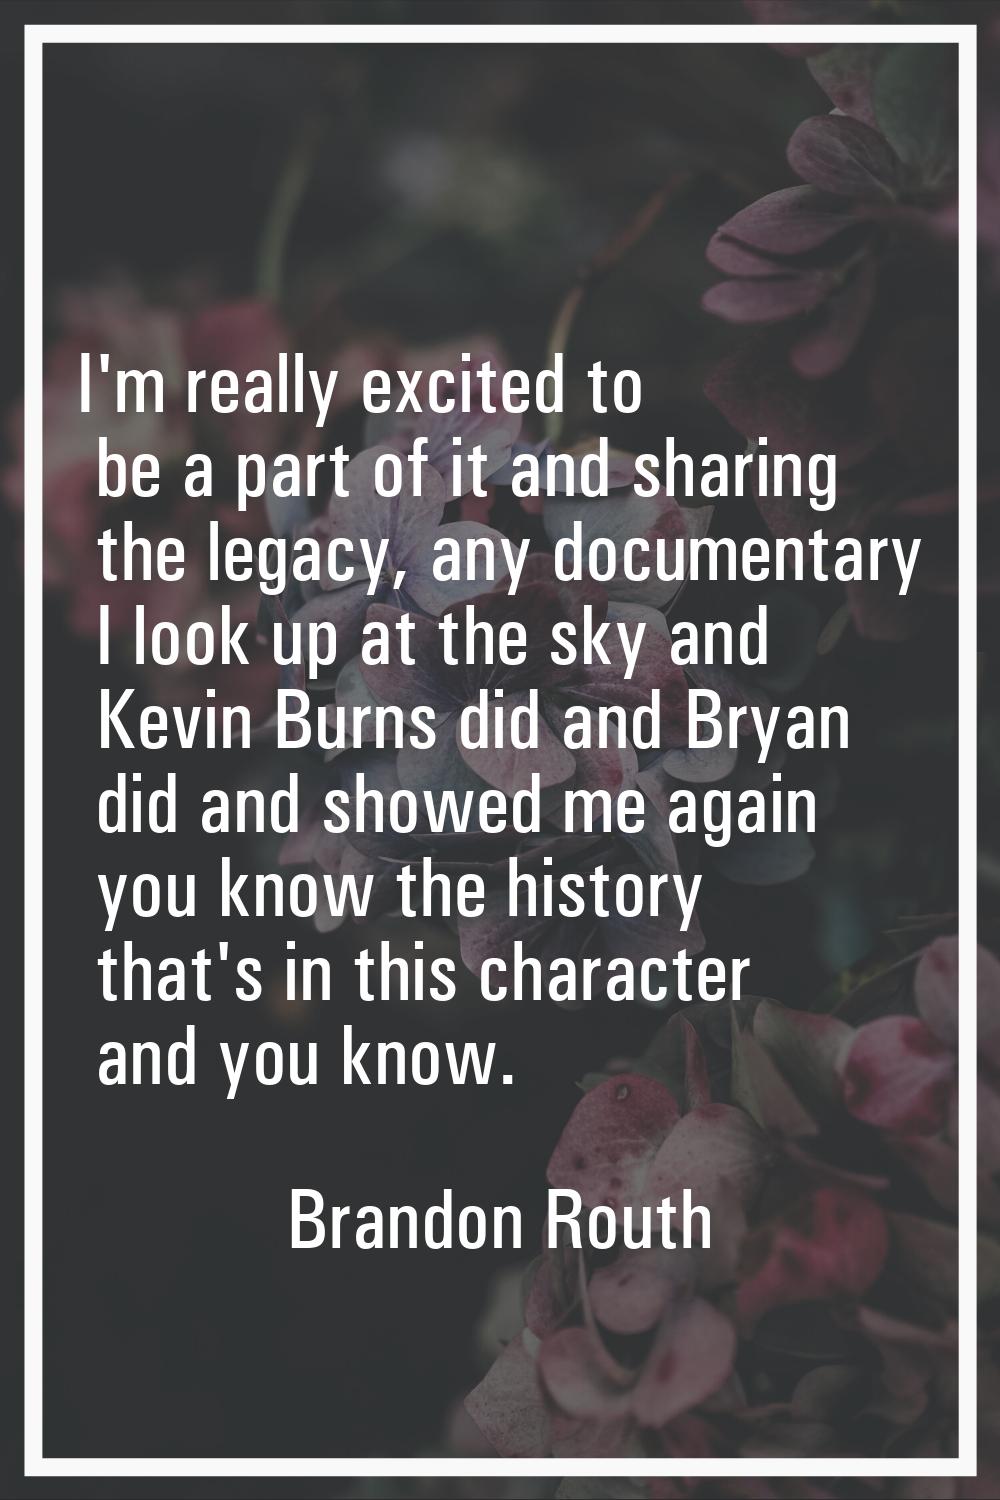 I'm really excited to be a part of it and sharing the legacy, any documentary I look up at the sky 